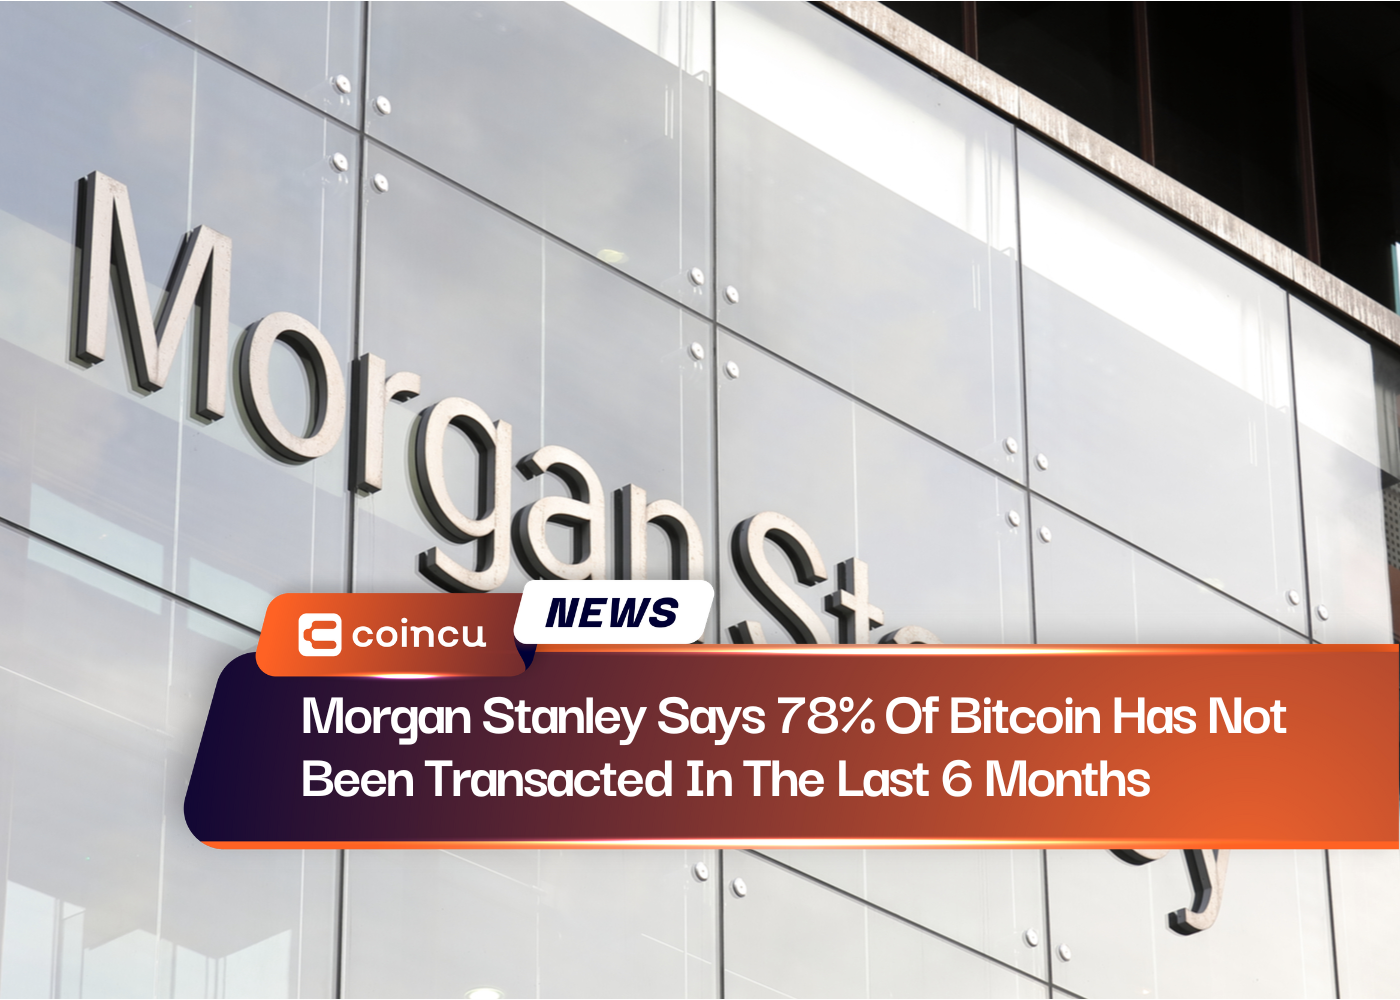 Morgan Stanley Says 78% Of Bitcoin Has Not Been Transacted In The Last 6 Months